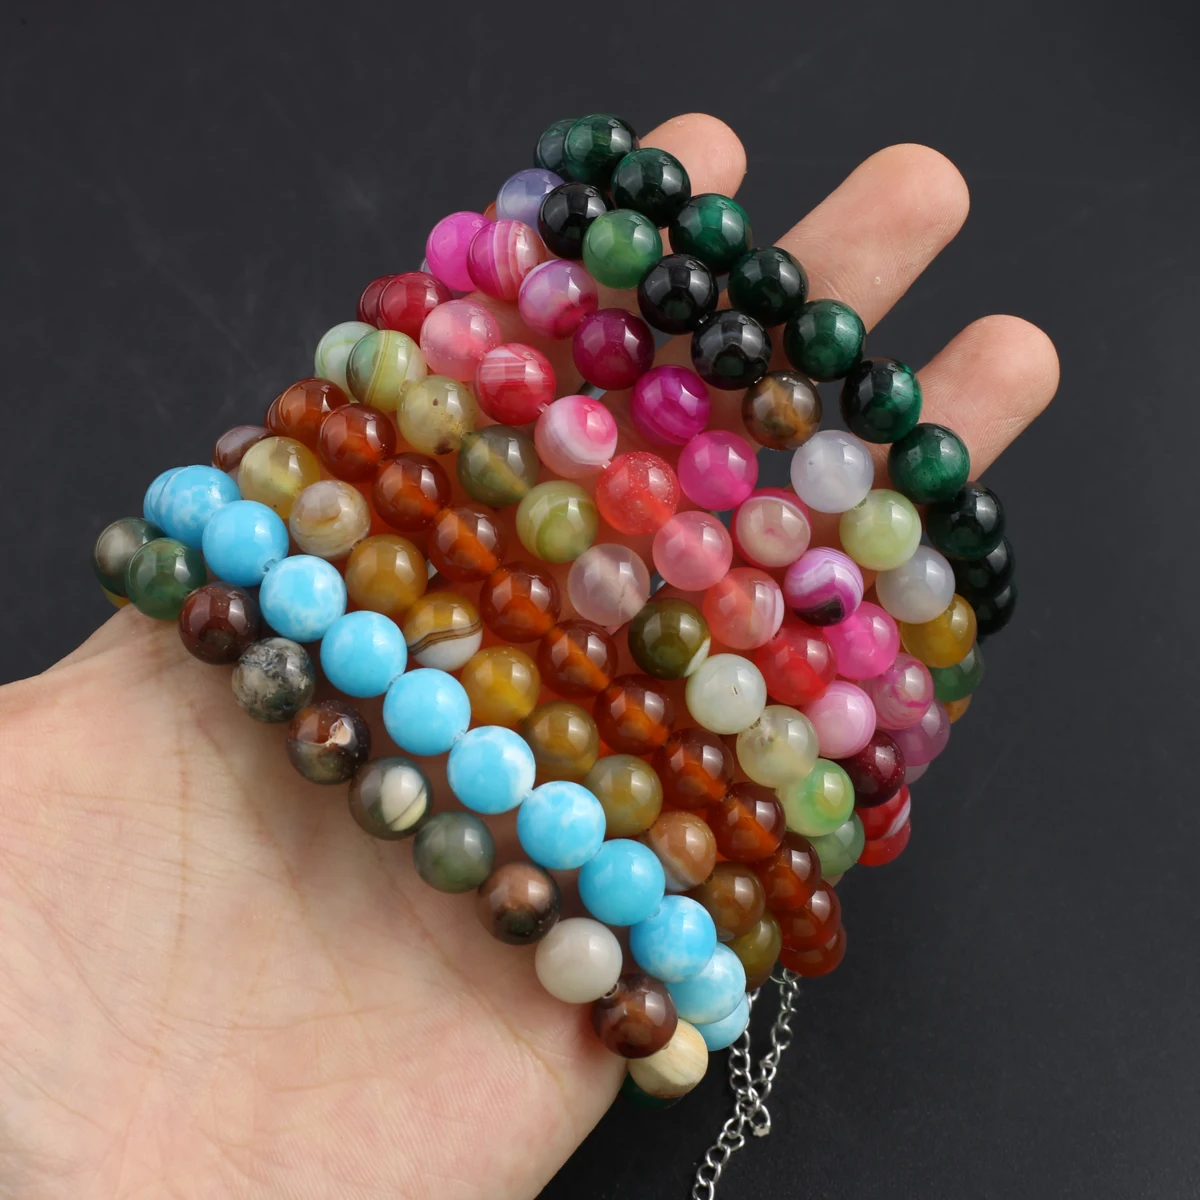 

7PCS Wholesale Random Color Agate Beaded Bracelet Charm Natural Stone Jewelry Accessories Valentine's Day Gifts for Men Women